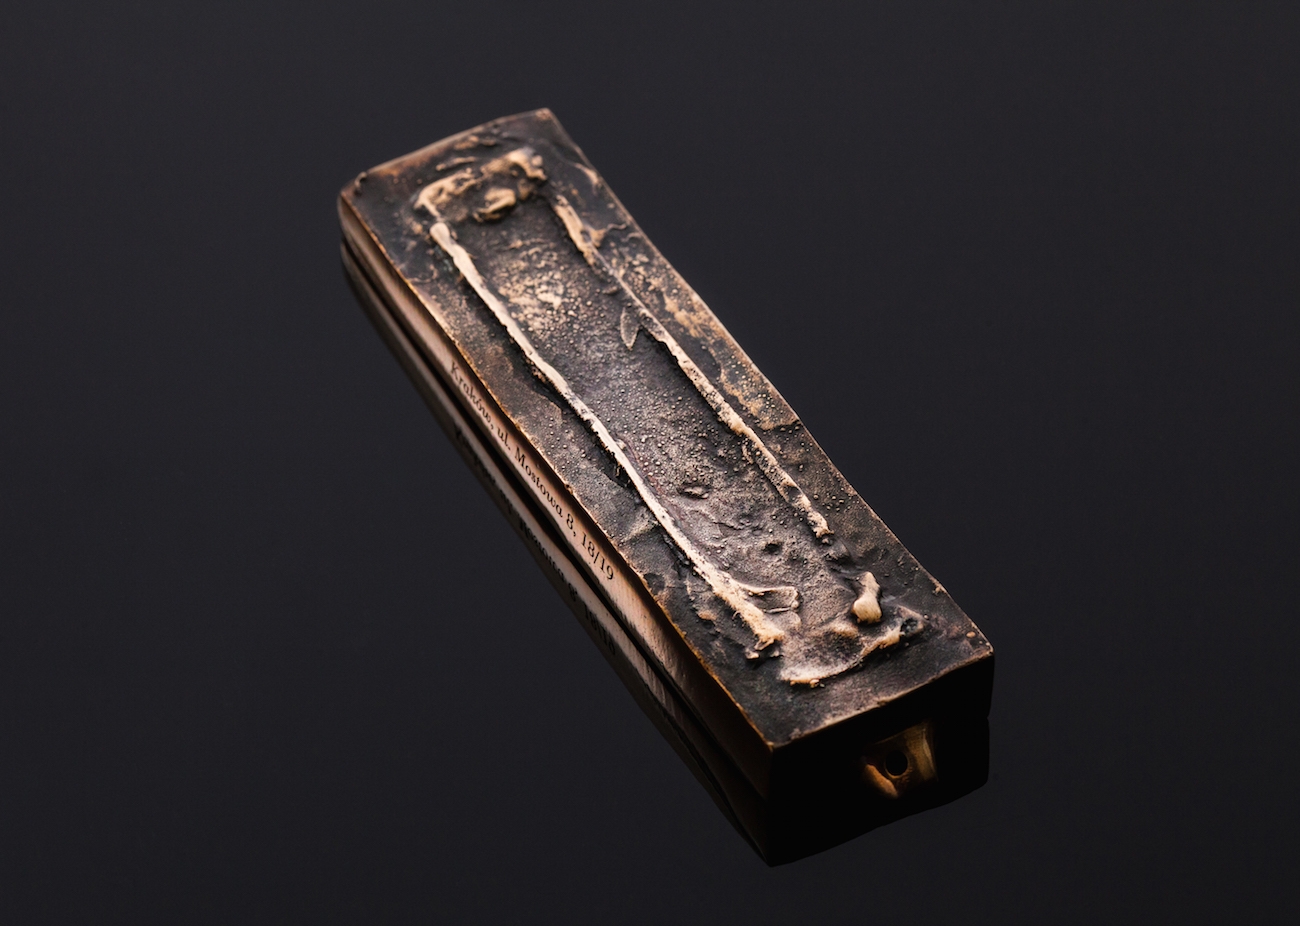 One of the bronze mezuzahs made by Mi Polin from a trace of an old Polish mezuzah. (Mi Polin)